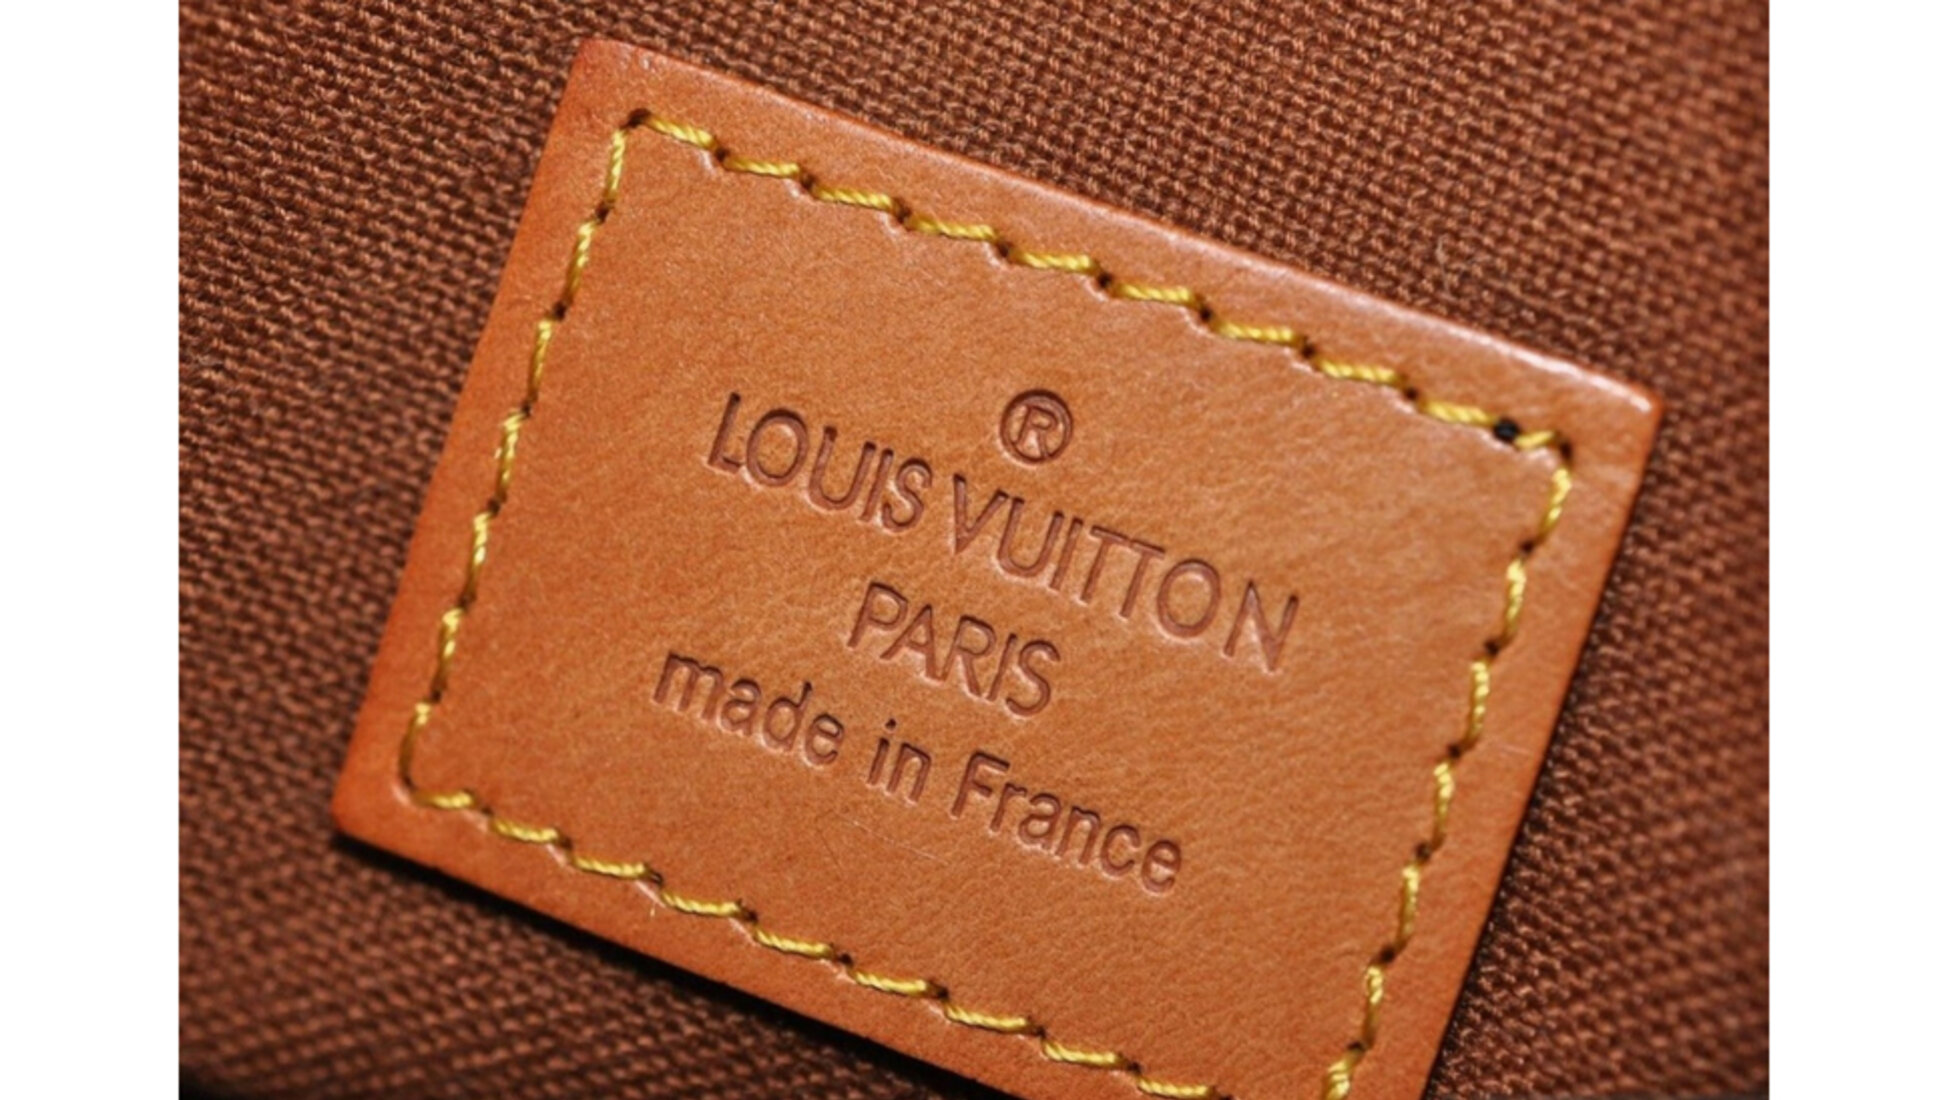 how to know if a bag is real louis vuitton